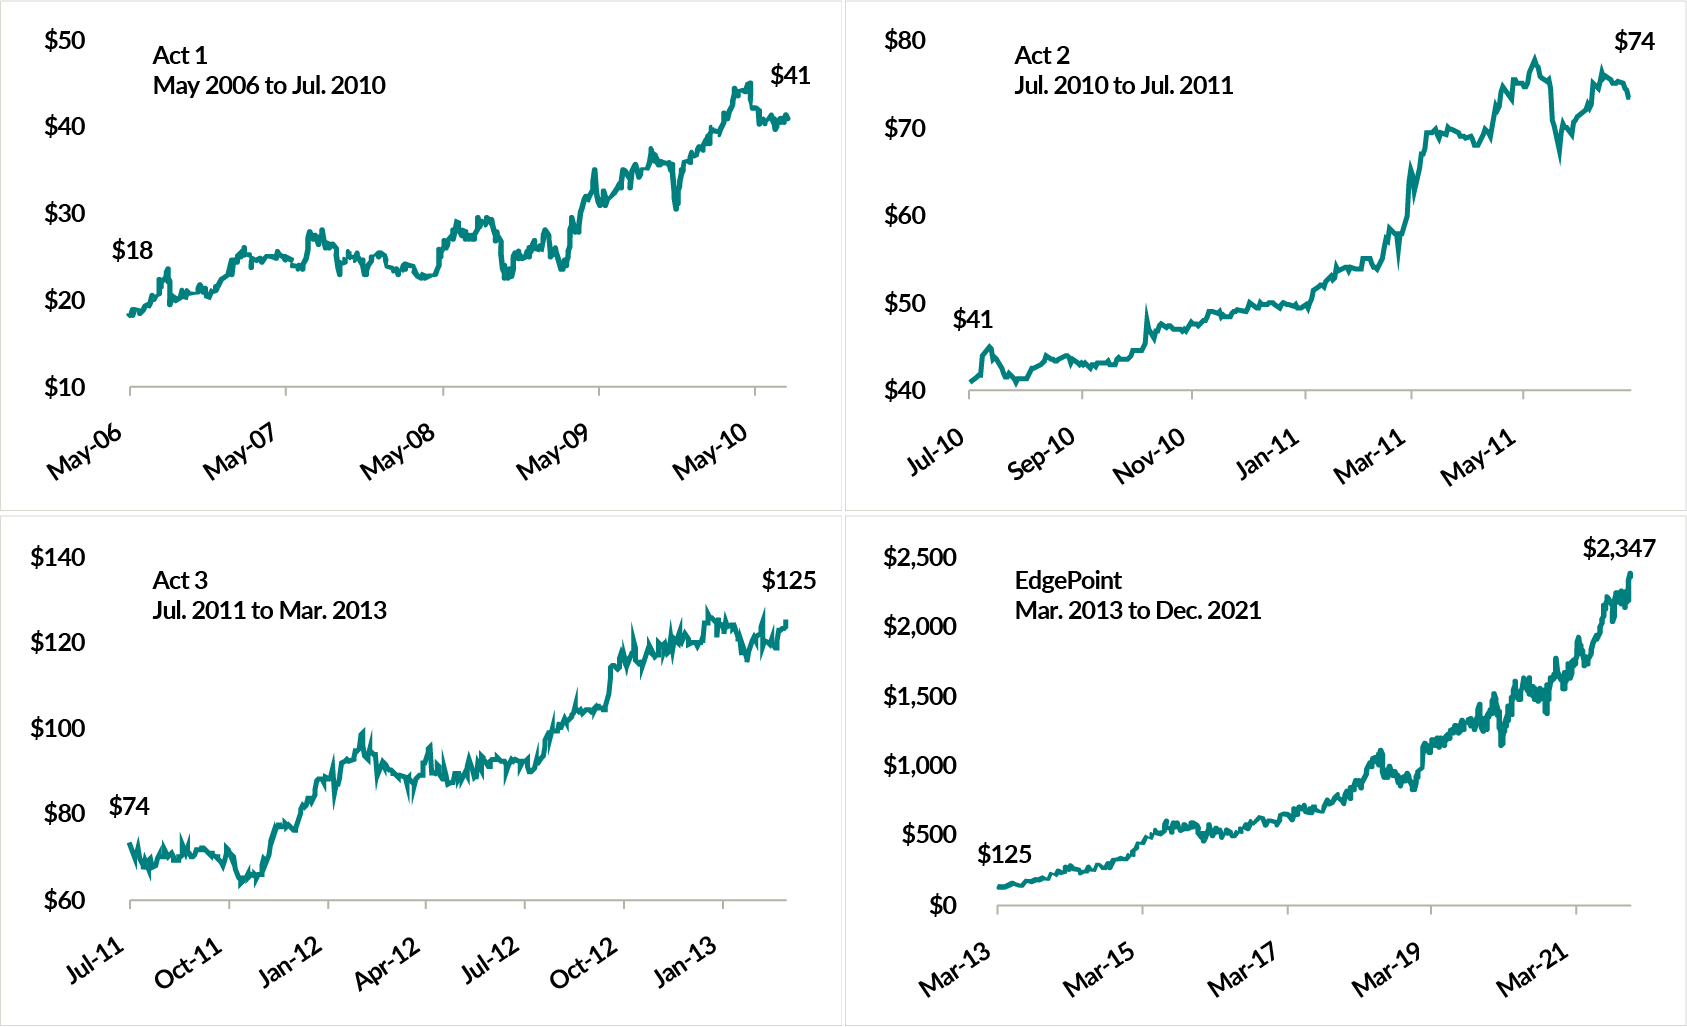 Four charts showing Constellation Software Inc.'s share price from its inception on May 18, 2006 to December 31, 2021. The four charts are divided based on three periods prior to EdgePoint's purchase of Constellation, followed by the period following EdgePoint's first purchase. The start and end prices are shown for each period. Period 1: May 18, 2008 to July 31, 2010  Starting price: $18  Ending price: $41. Period 2: July 31, 2010 to July 31, 2011  Starting price: $41  Ending price: $74. Period 3: July 31, 2011 to March 31, 2013  Starting price: $74  Ending price: $125. Period 4: March 31, 2013 to December 31, 2021  Starting price: $125  Ending price: $2,347